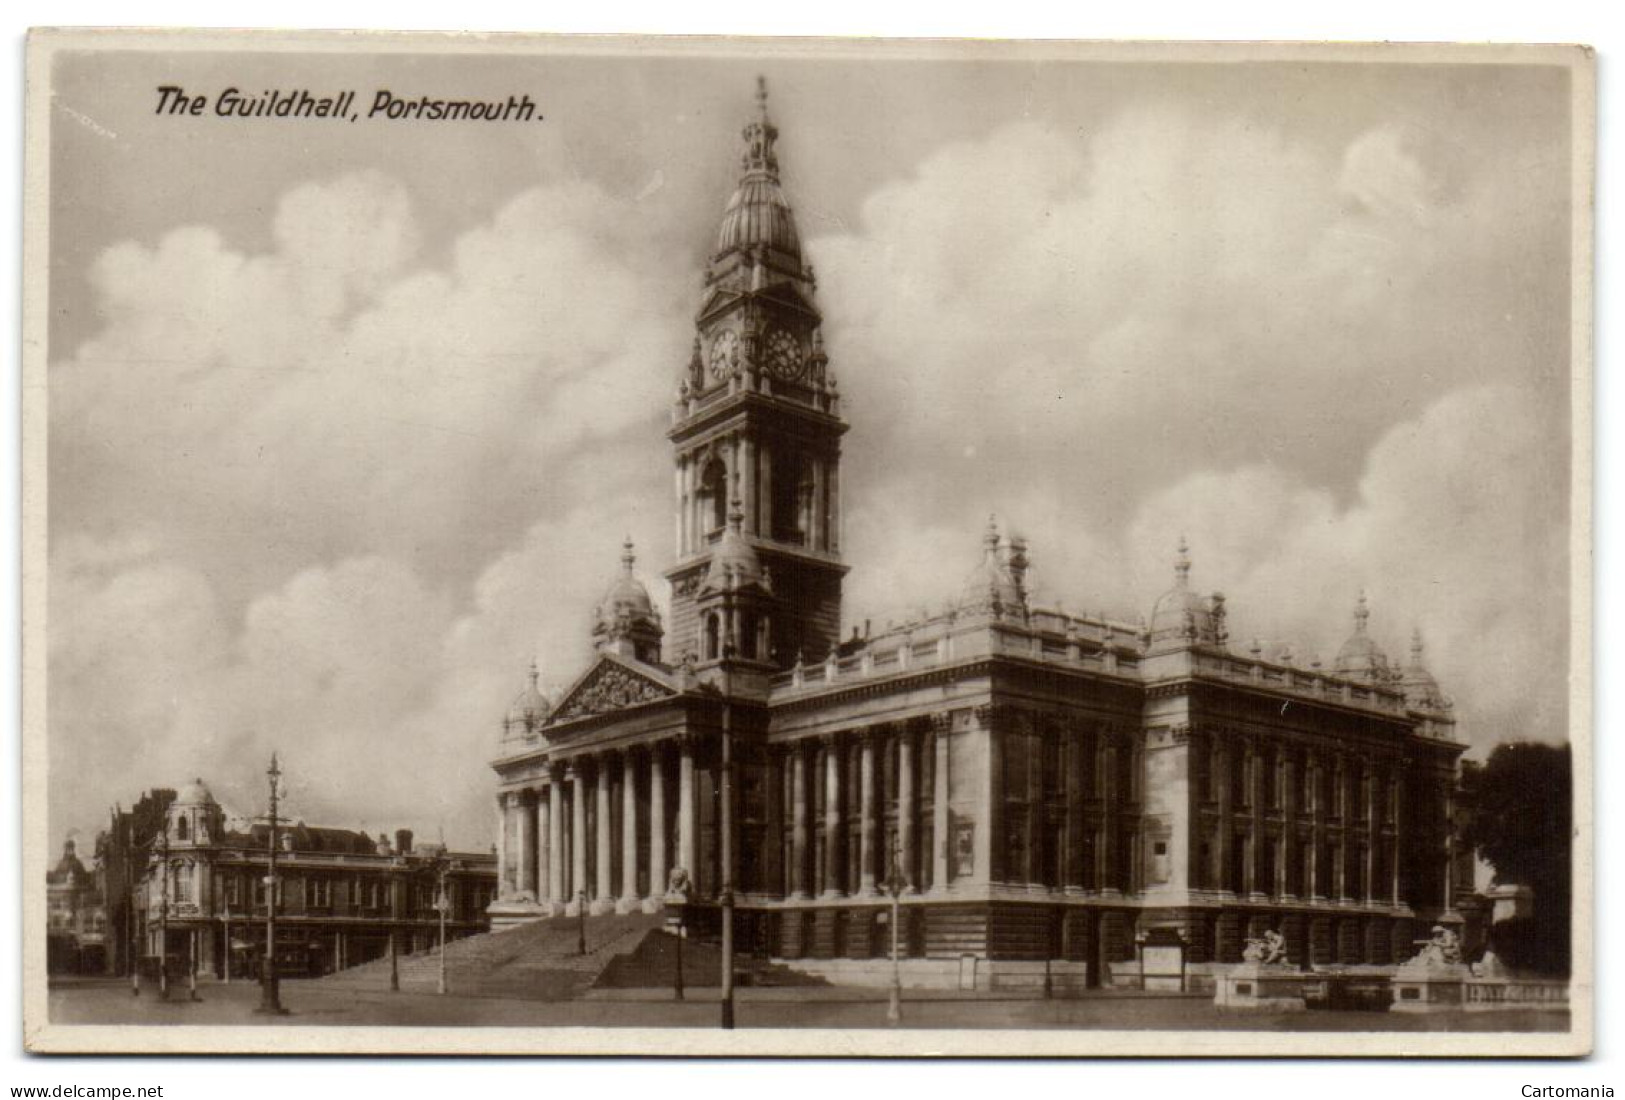 The Guildhall - Portsmouth - Portsmouth